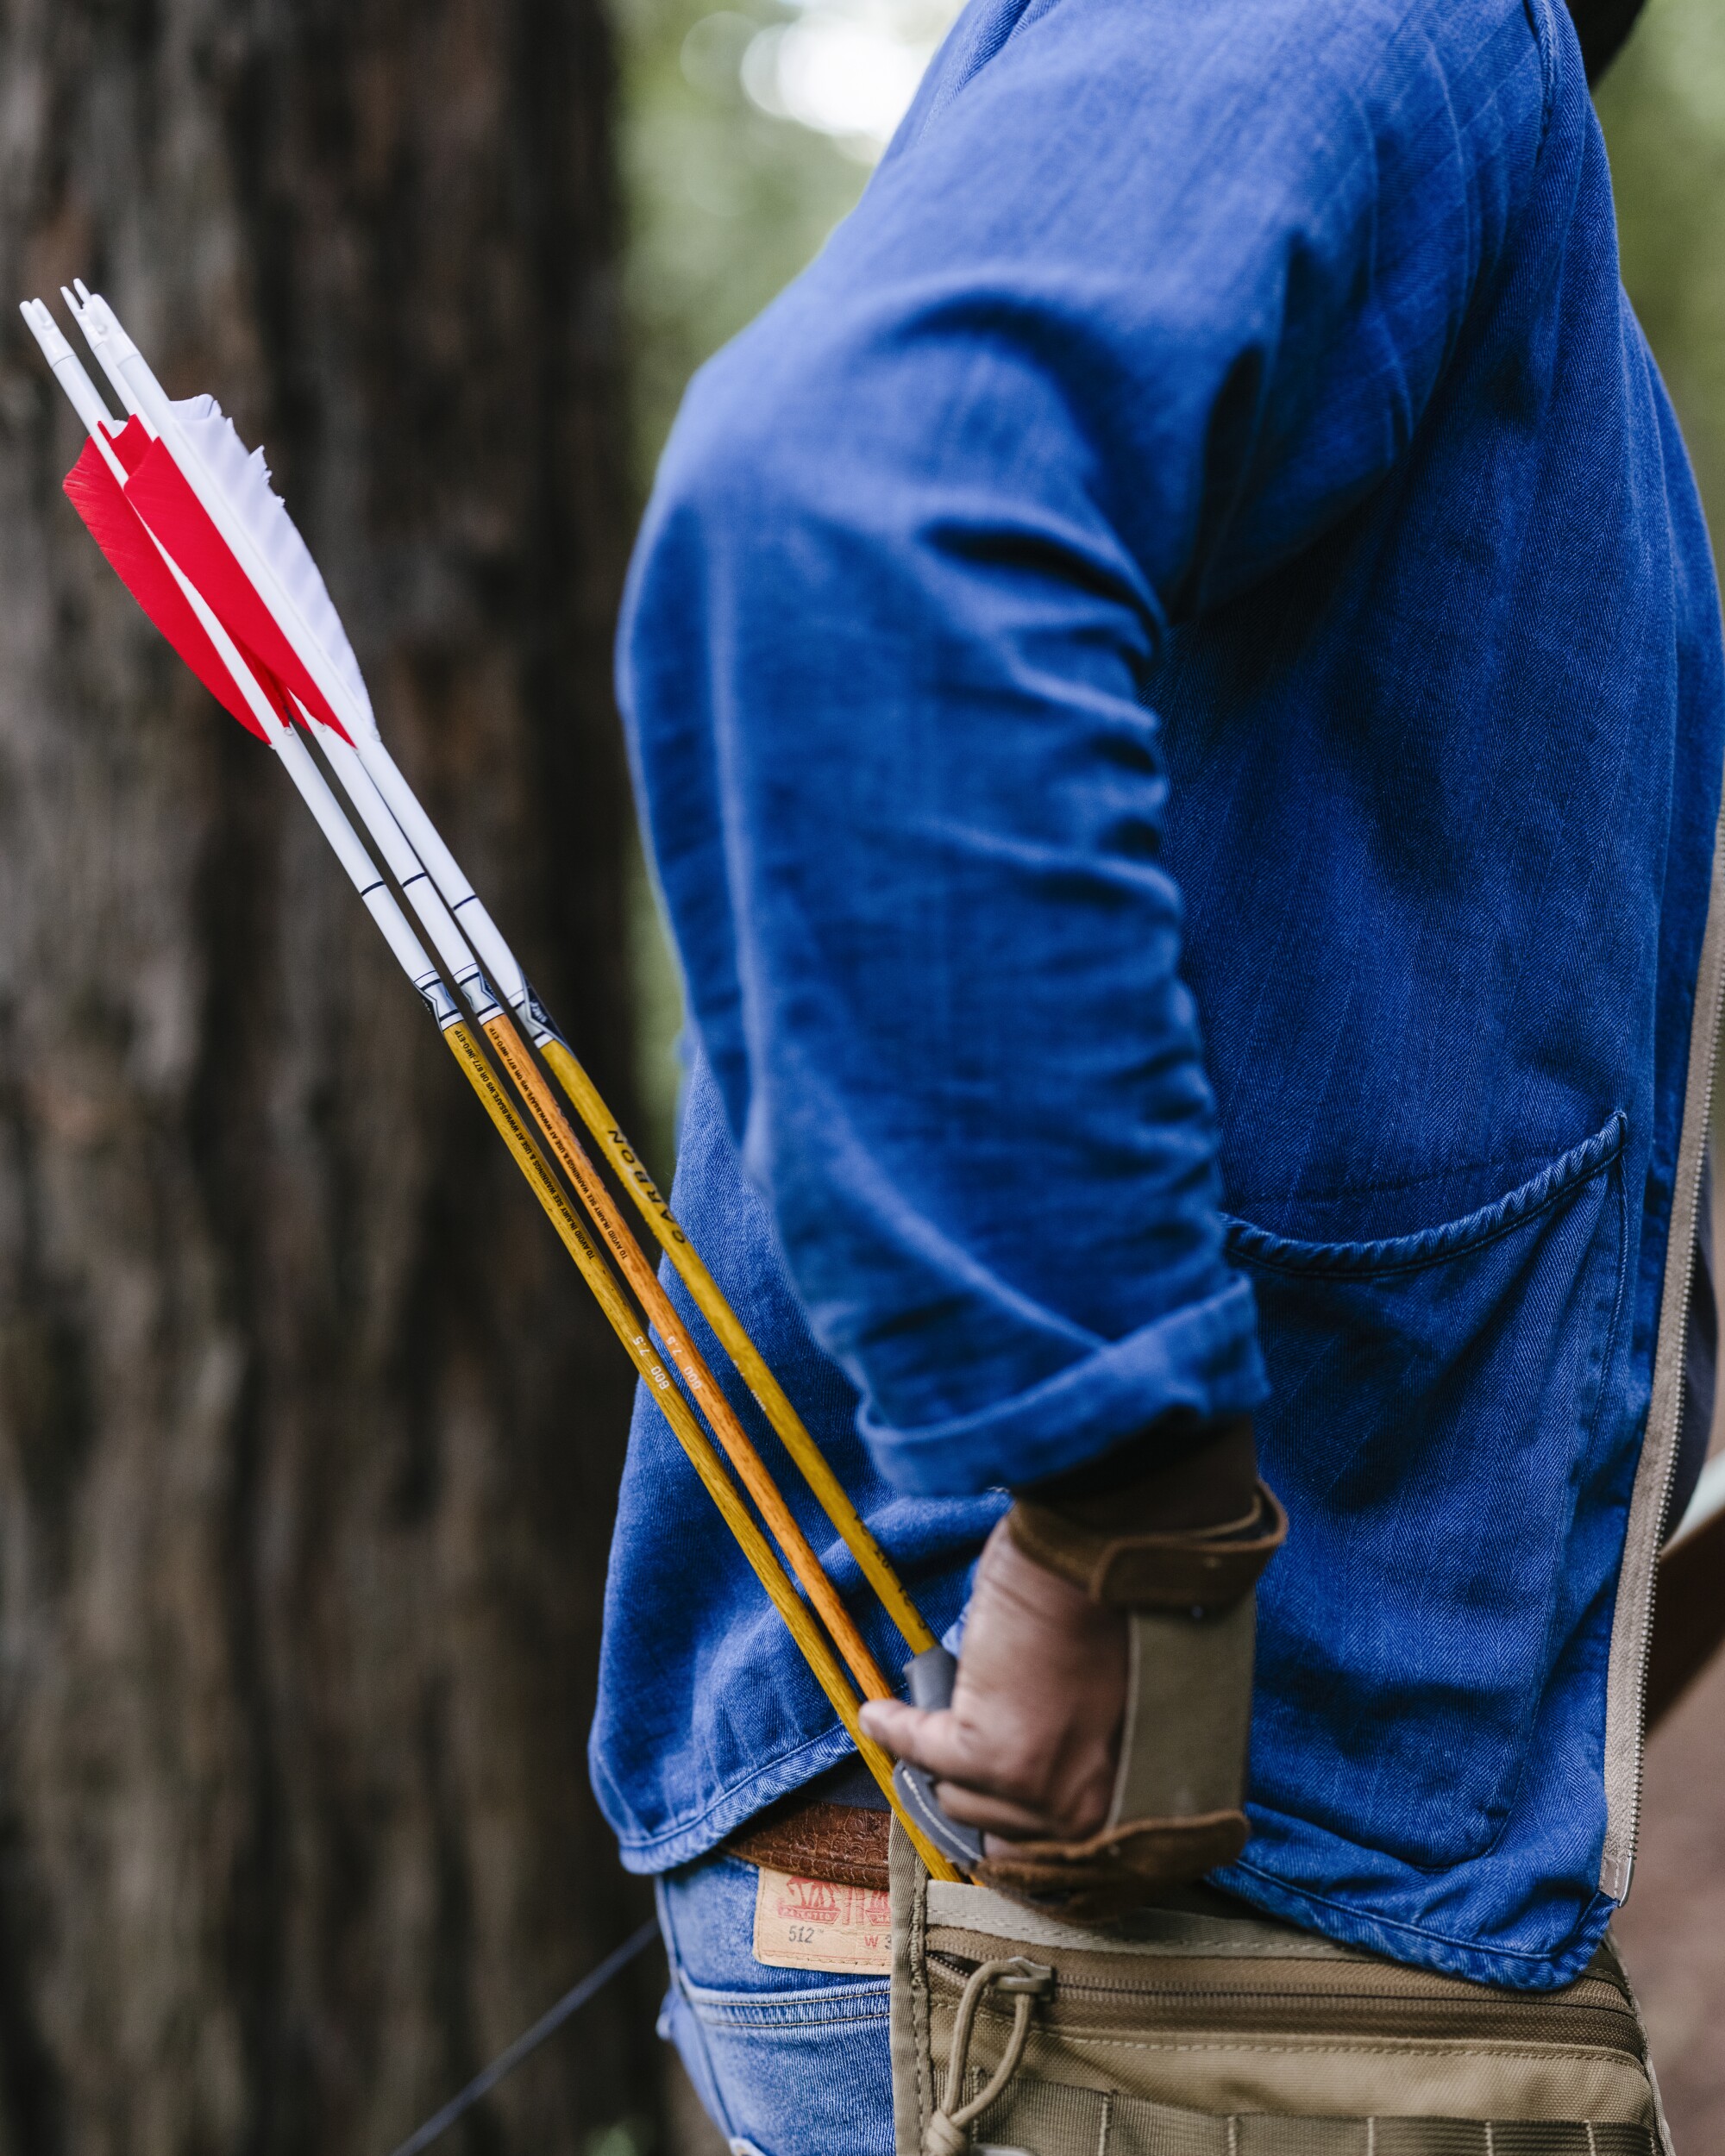 A man in a blue shirt reaches for a quiver of arrows.